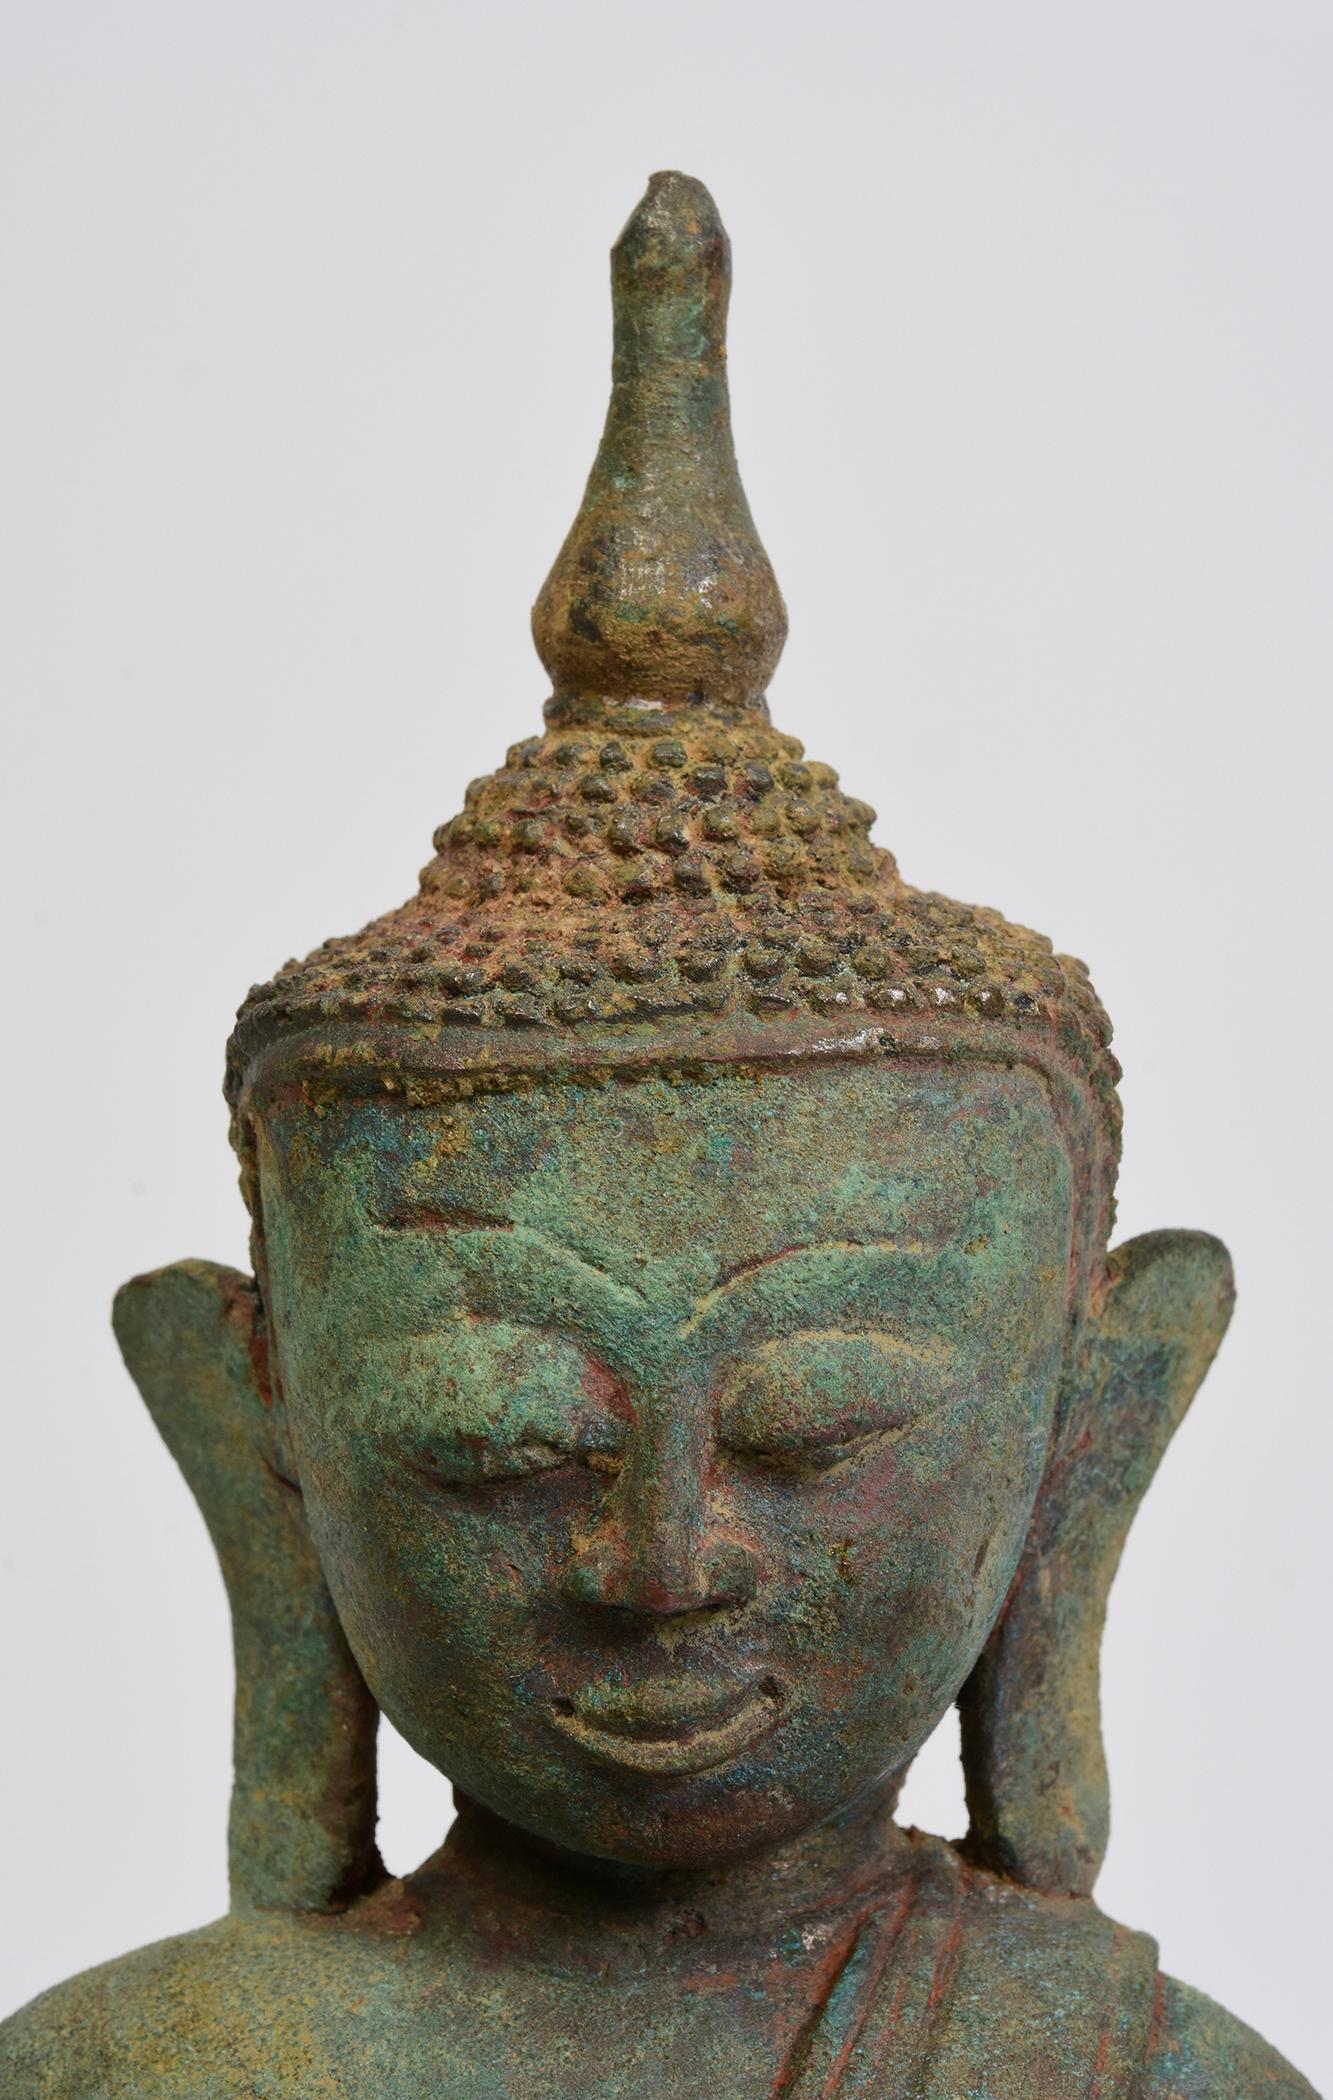 Antique Burmese bronze Buddha sitting in Mara Vijaya (calling the earth to witness) posture on double lotus base with excellent green patina.

Age: Burma, Shan Period, 16th Century
Size: Height 29.5 C.M. / Width 16.8 C.M. / Depth 12 C.M.
Condition: